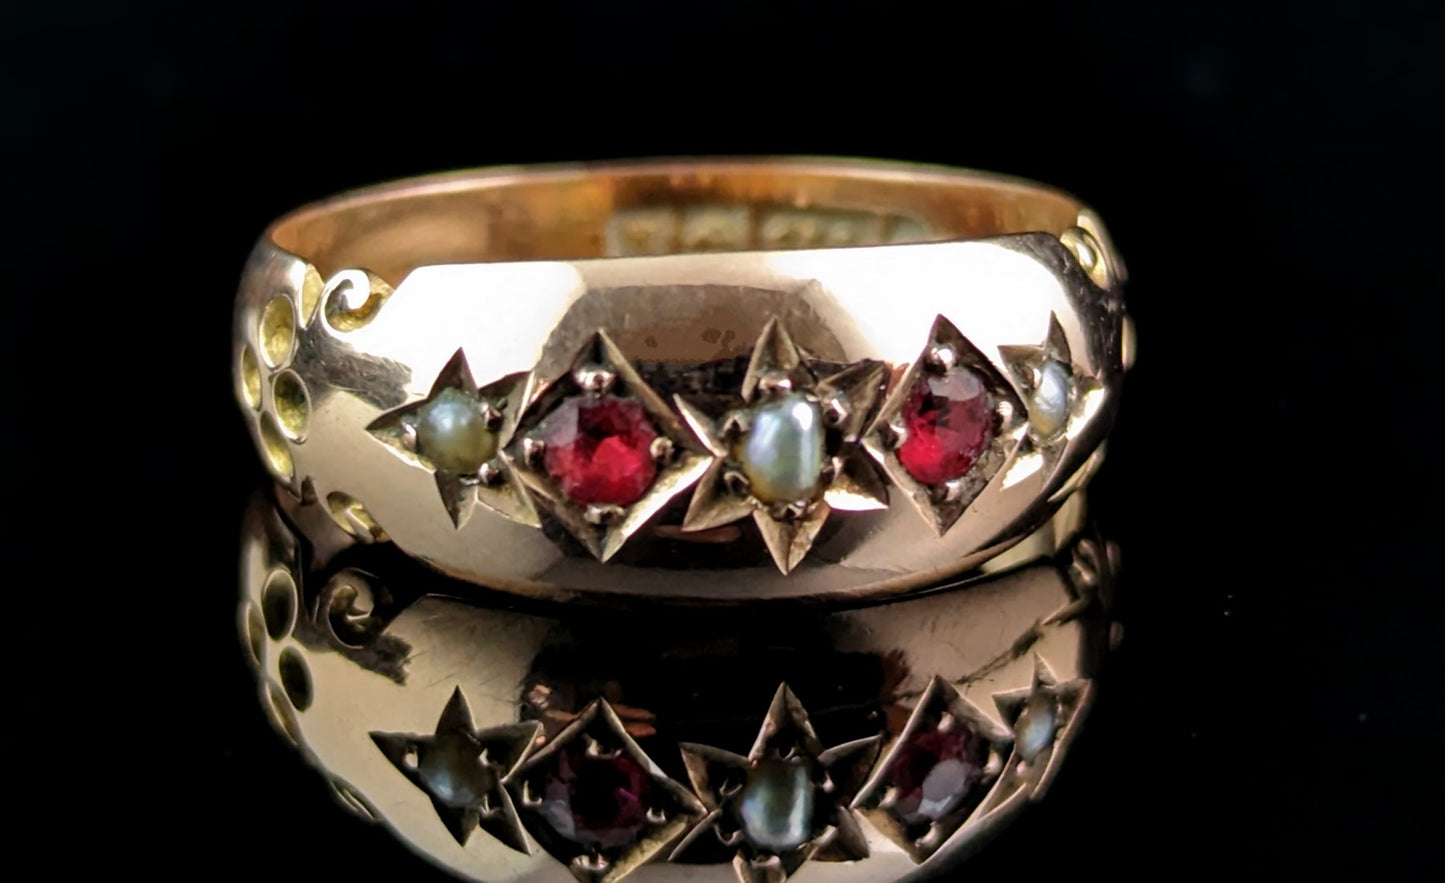 Antique Gypsy set ring, 9ct gold, Red paste and pearl